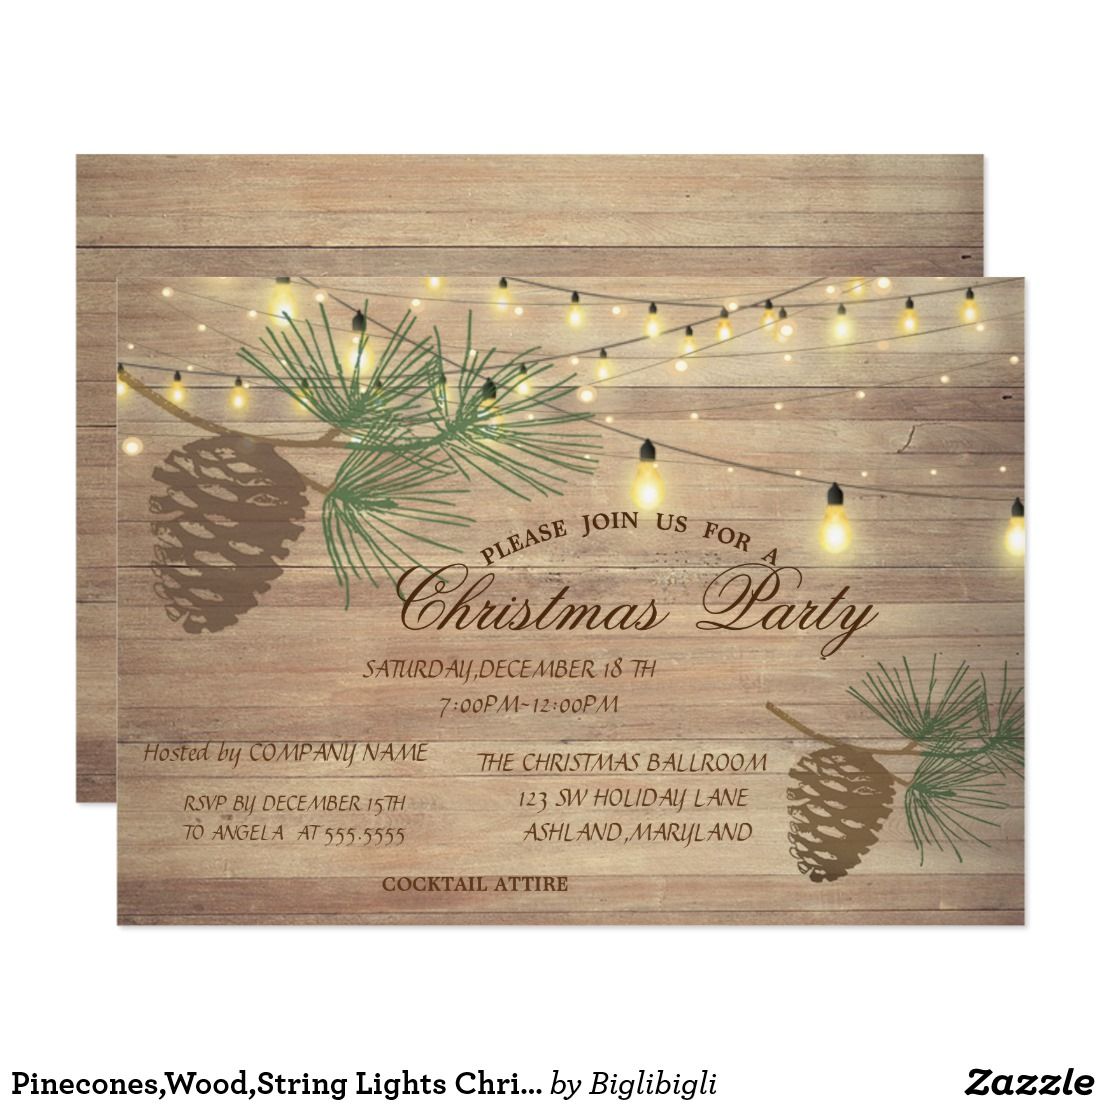 Pinecones,Wood,String Lights Christmas Corporated Invitation